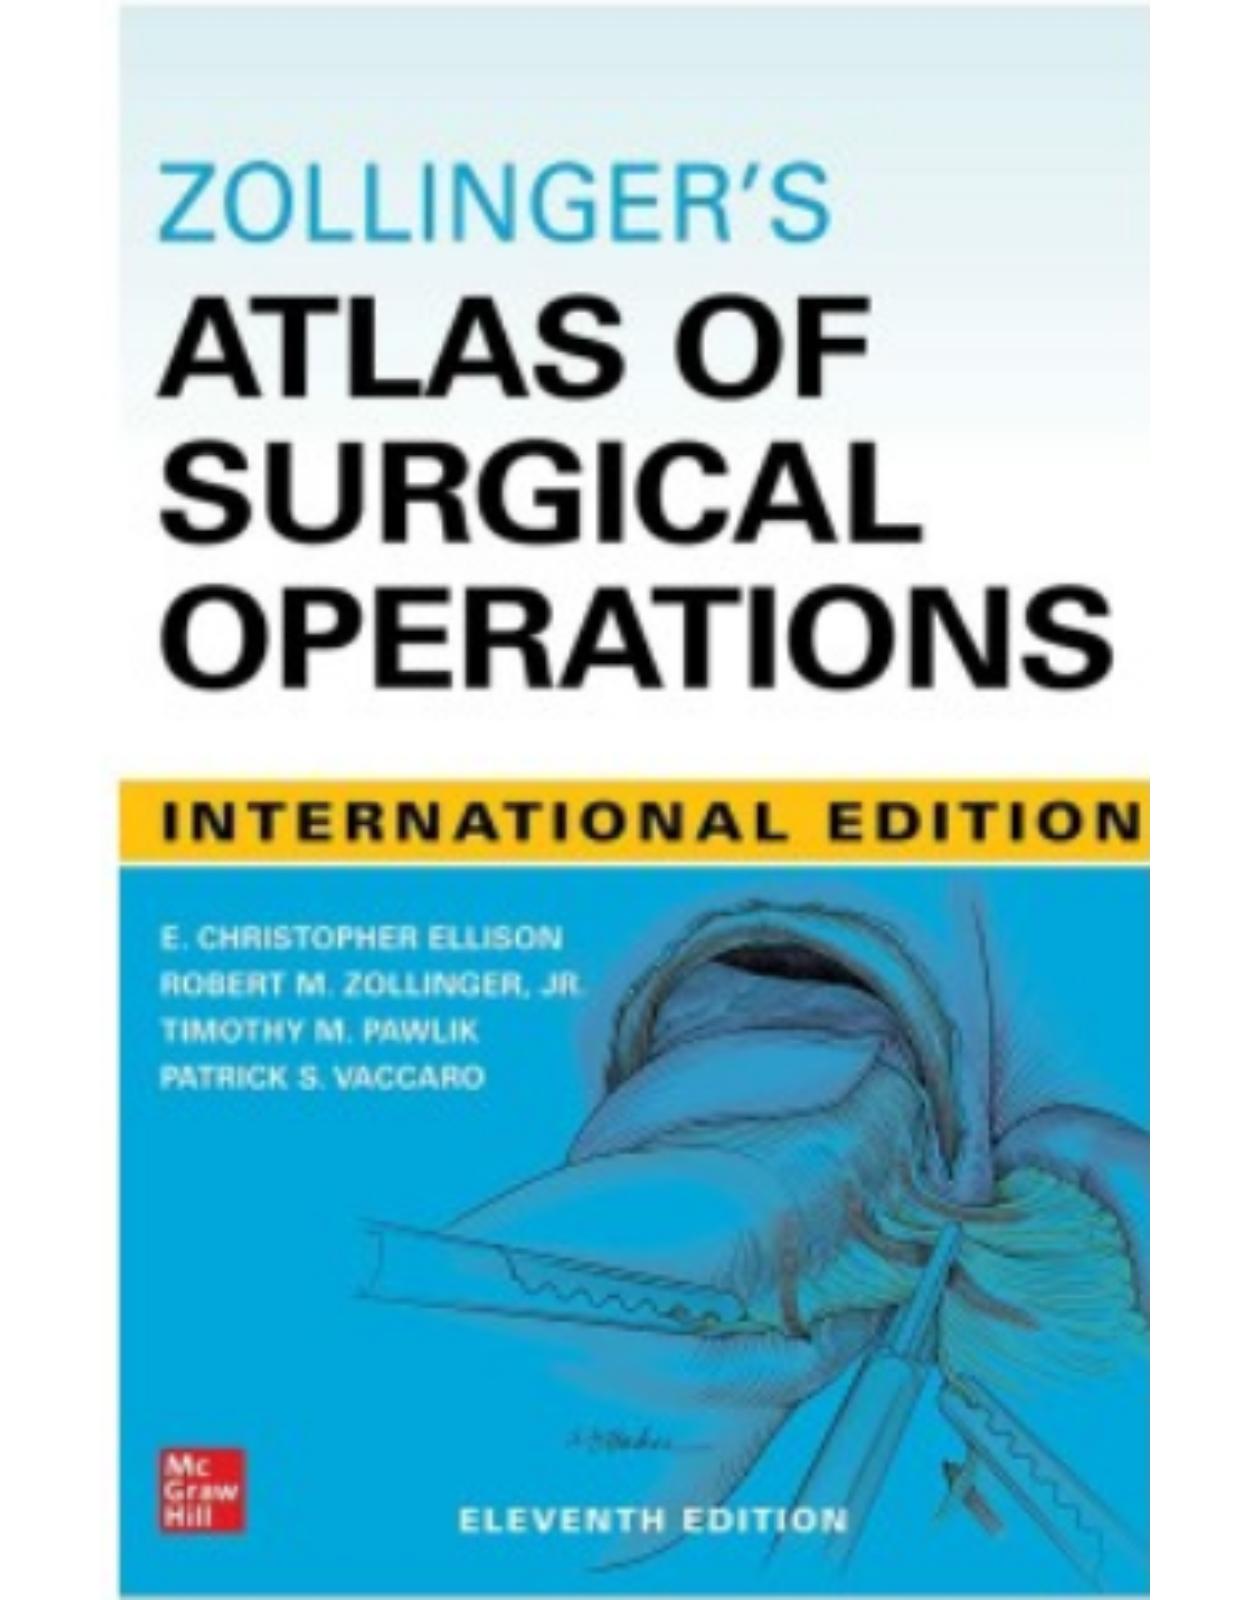 Zollinger’s Atlas Of Surgical Operations, Eleventh Edition